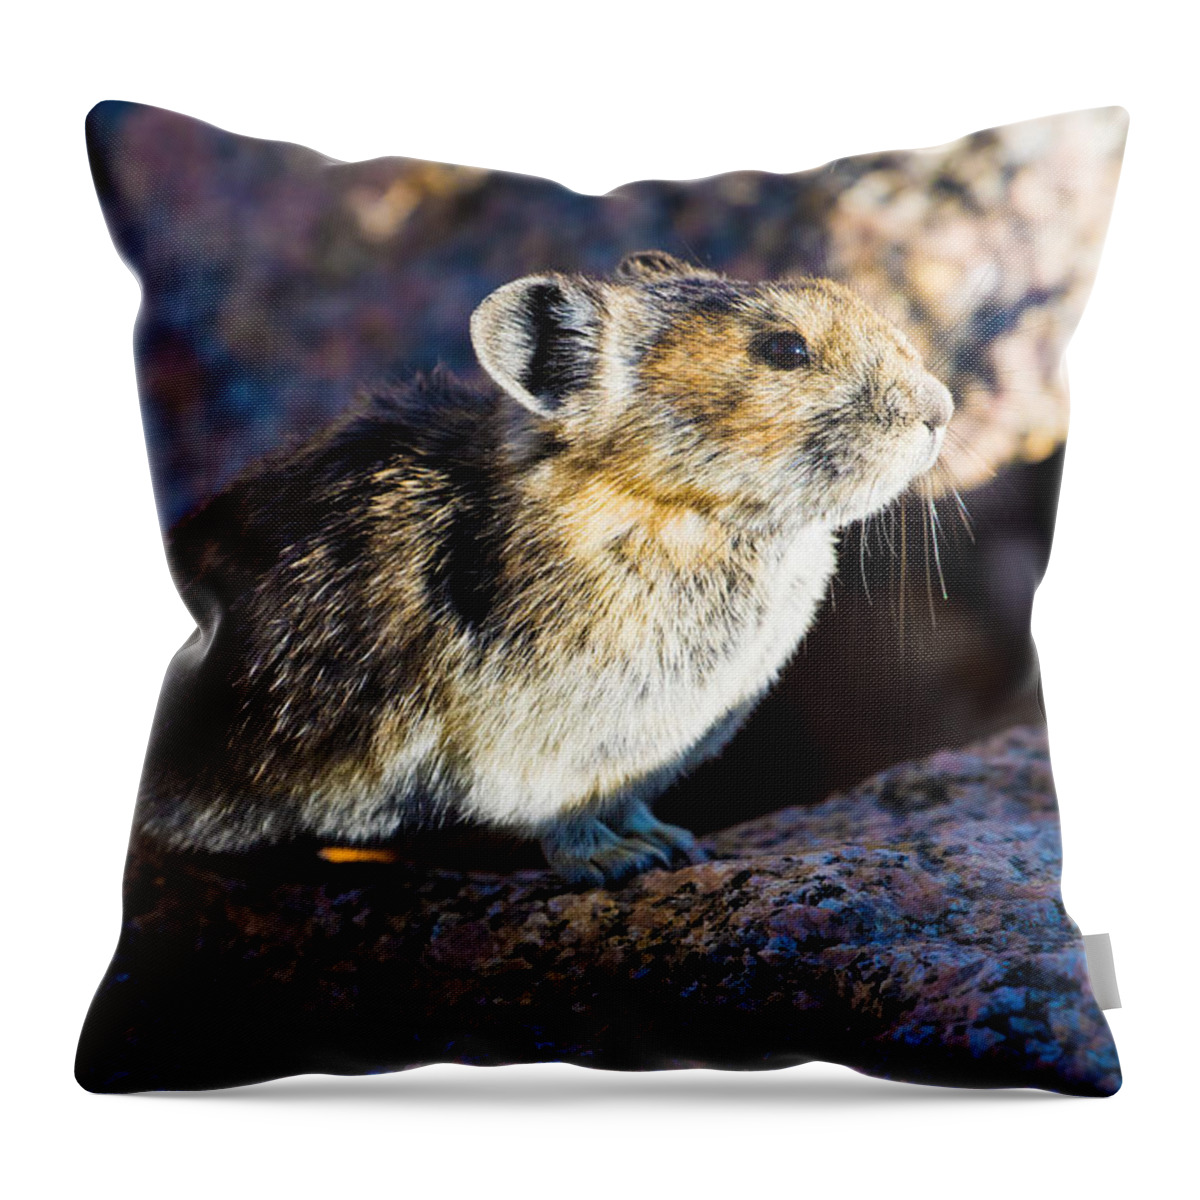 Pika Throw Pillow featuring the photograph Pika Portrait by Mindy Musick King